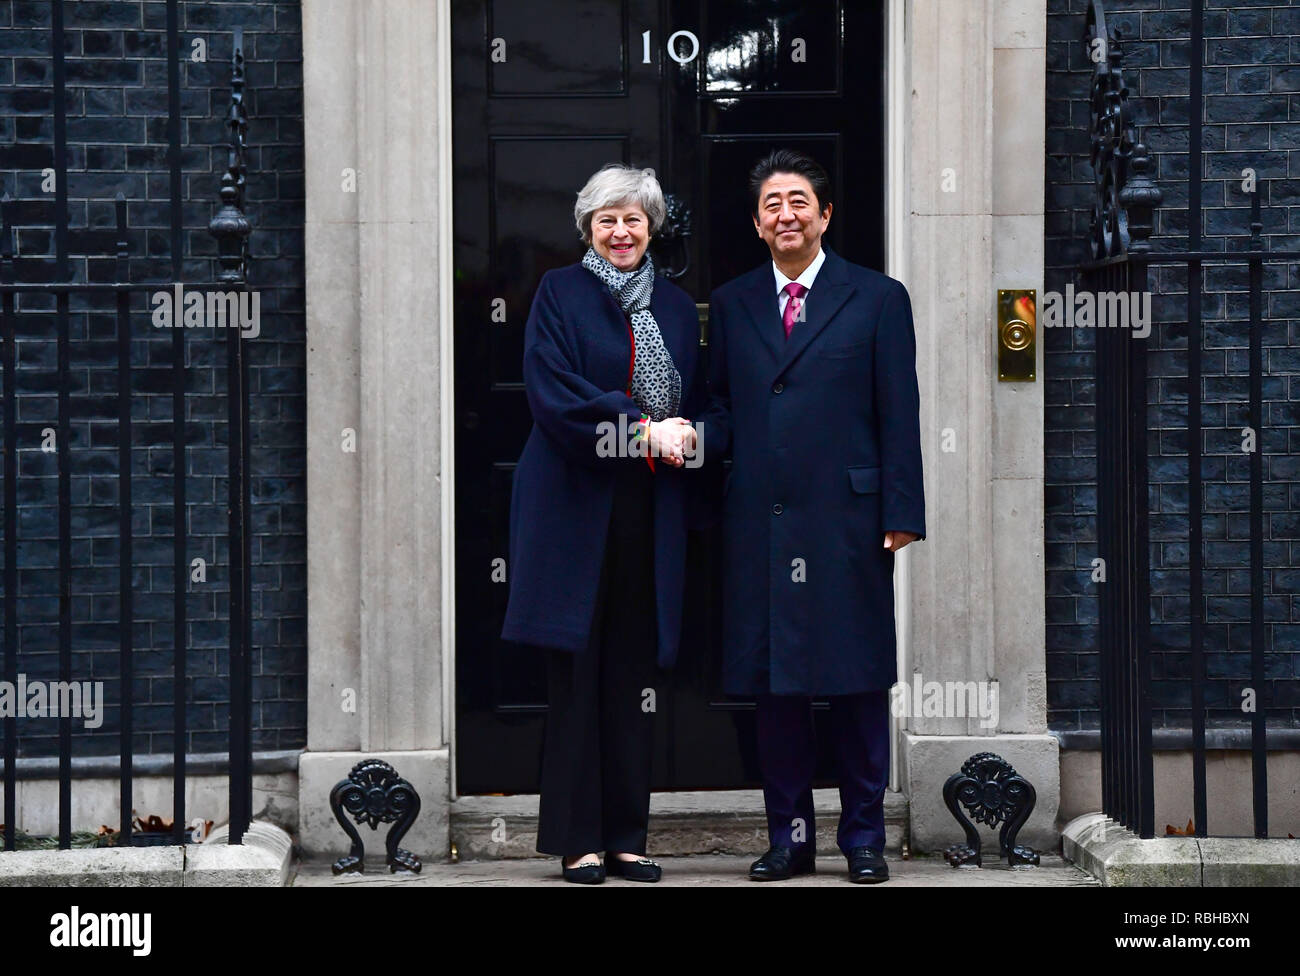 Prime Minister Theresa May greets Japanese Prime Minister Shinzo Abe outside 10 Downing Street, London ahead of a bilateral meeting. Stock Photo